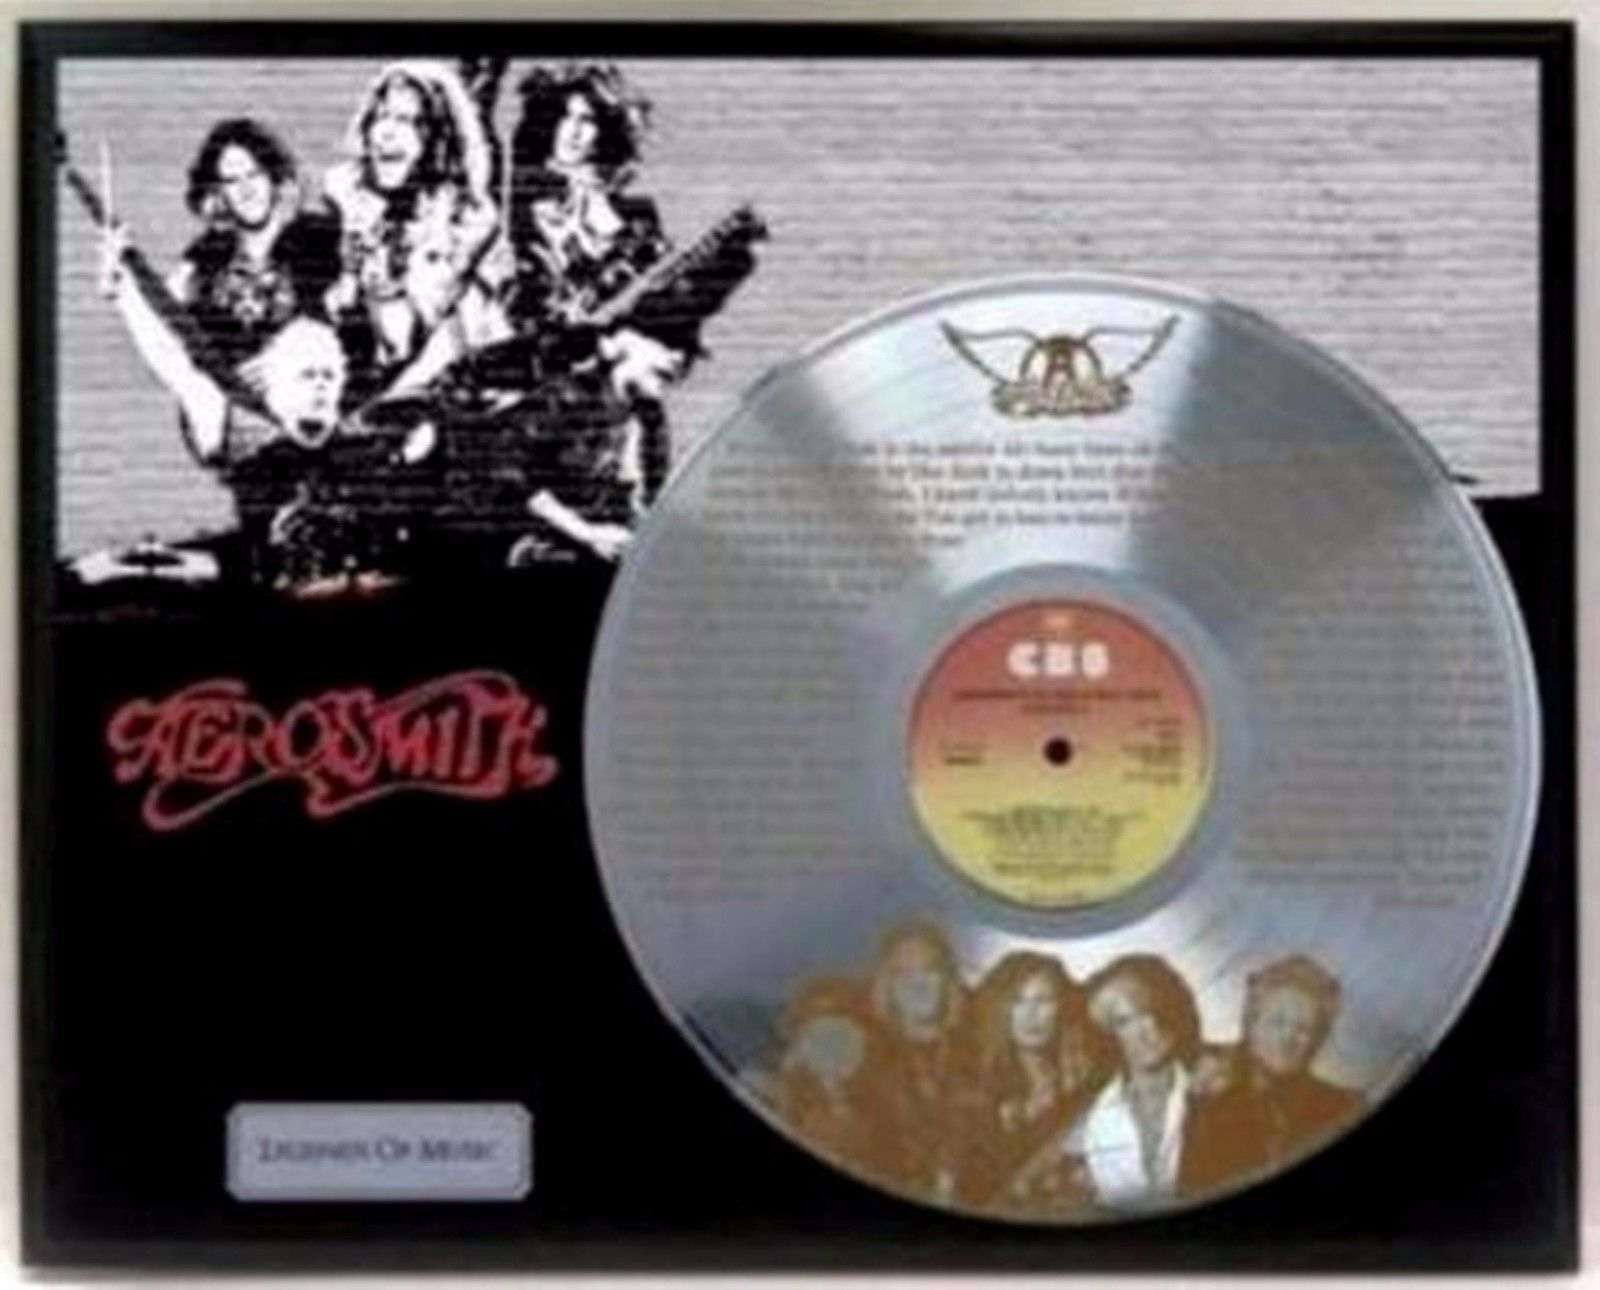 Aerosmith Gold 12" LP laser etched with "Dream On" Wall Art "M4"